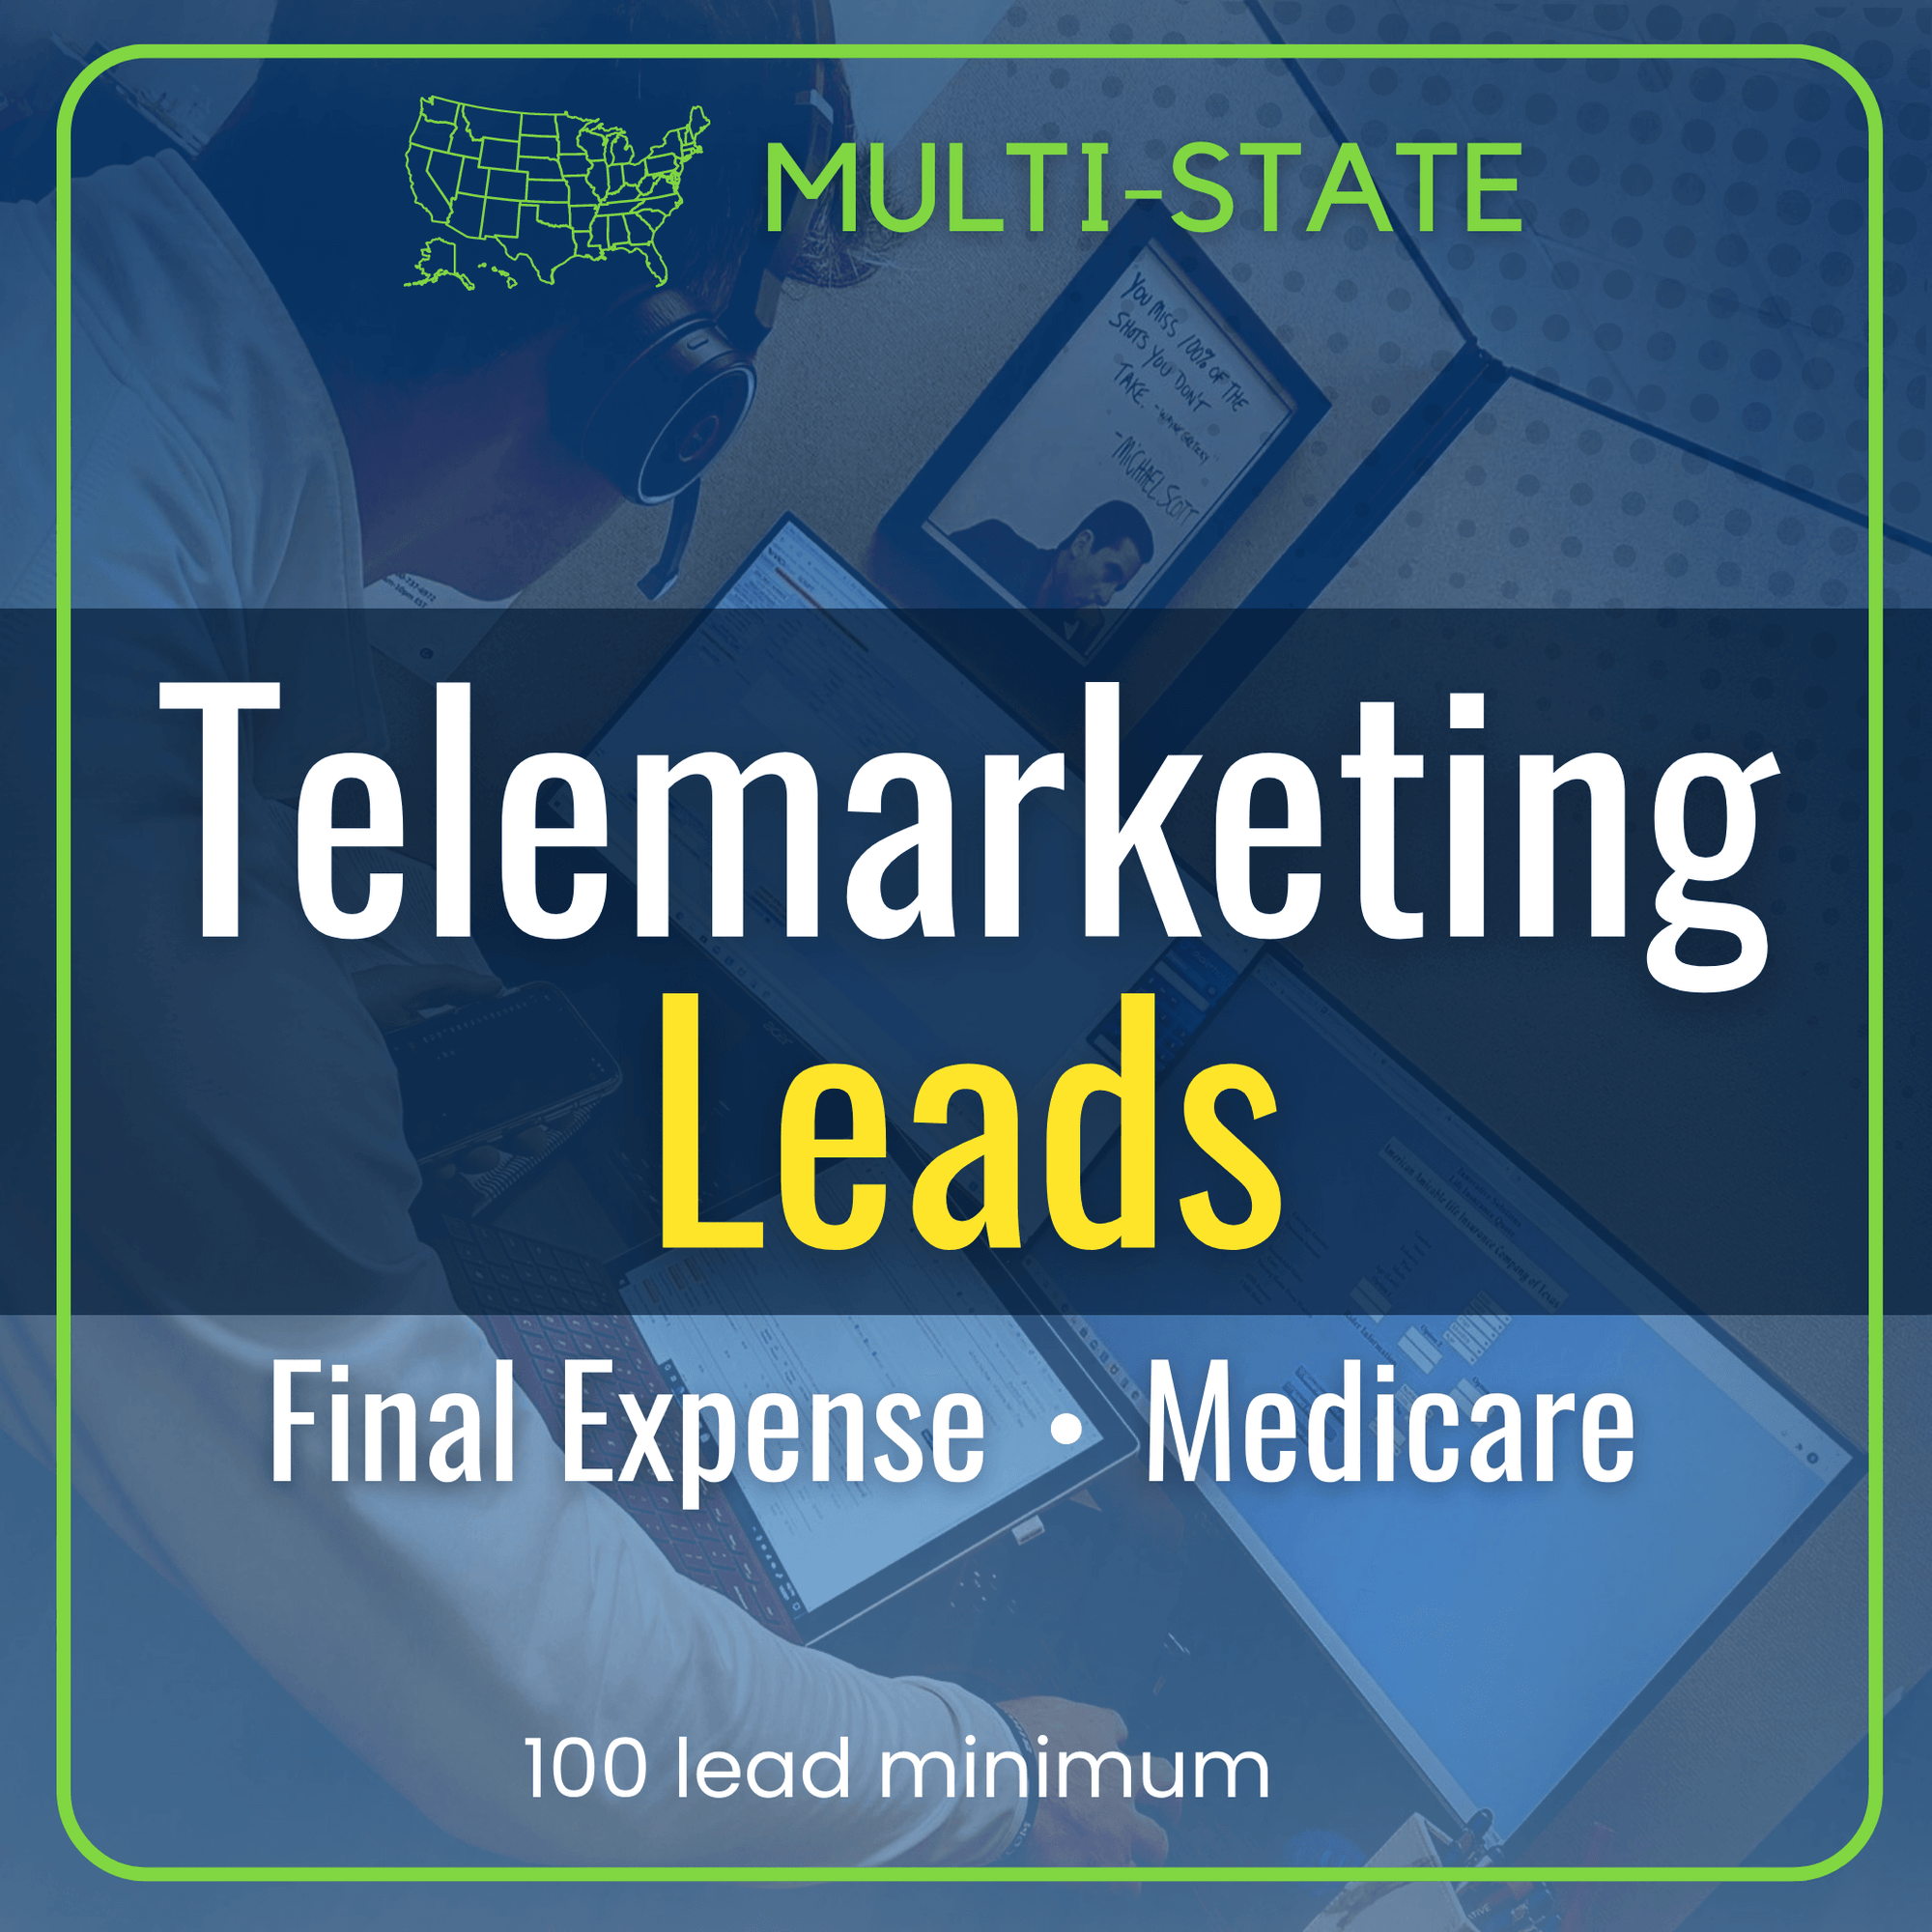 Telemarketing Leads (Multi-State) - All Things Insurance Group